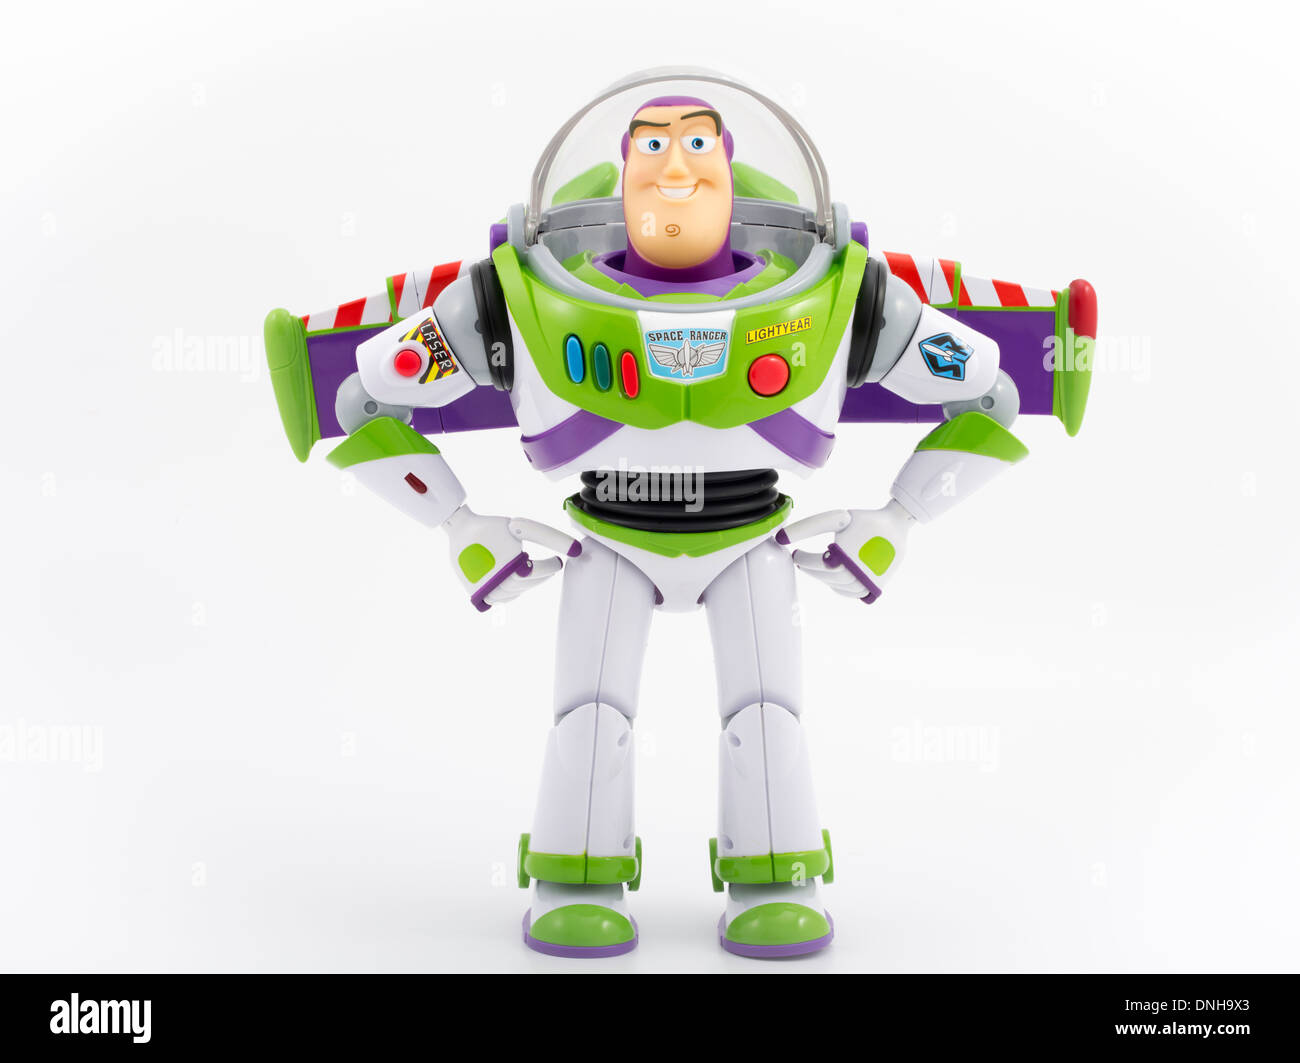 Buzz Lightyear iconic children's toy from movie Toy Story produced by Thinkway Toys Stock Photo